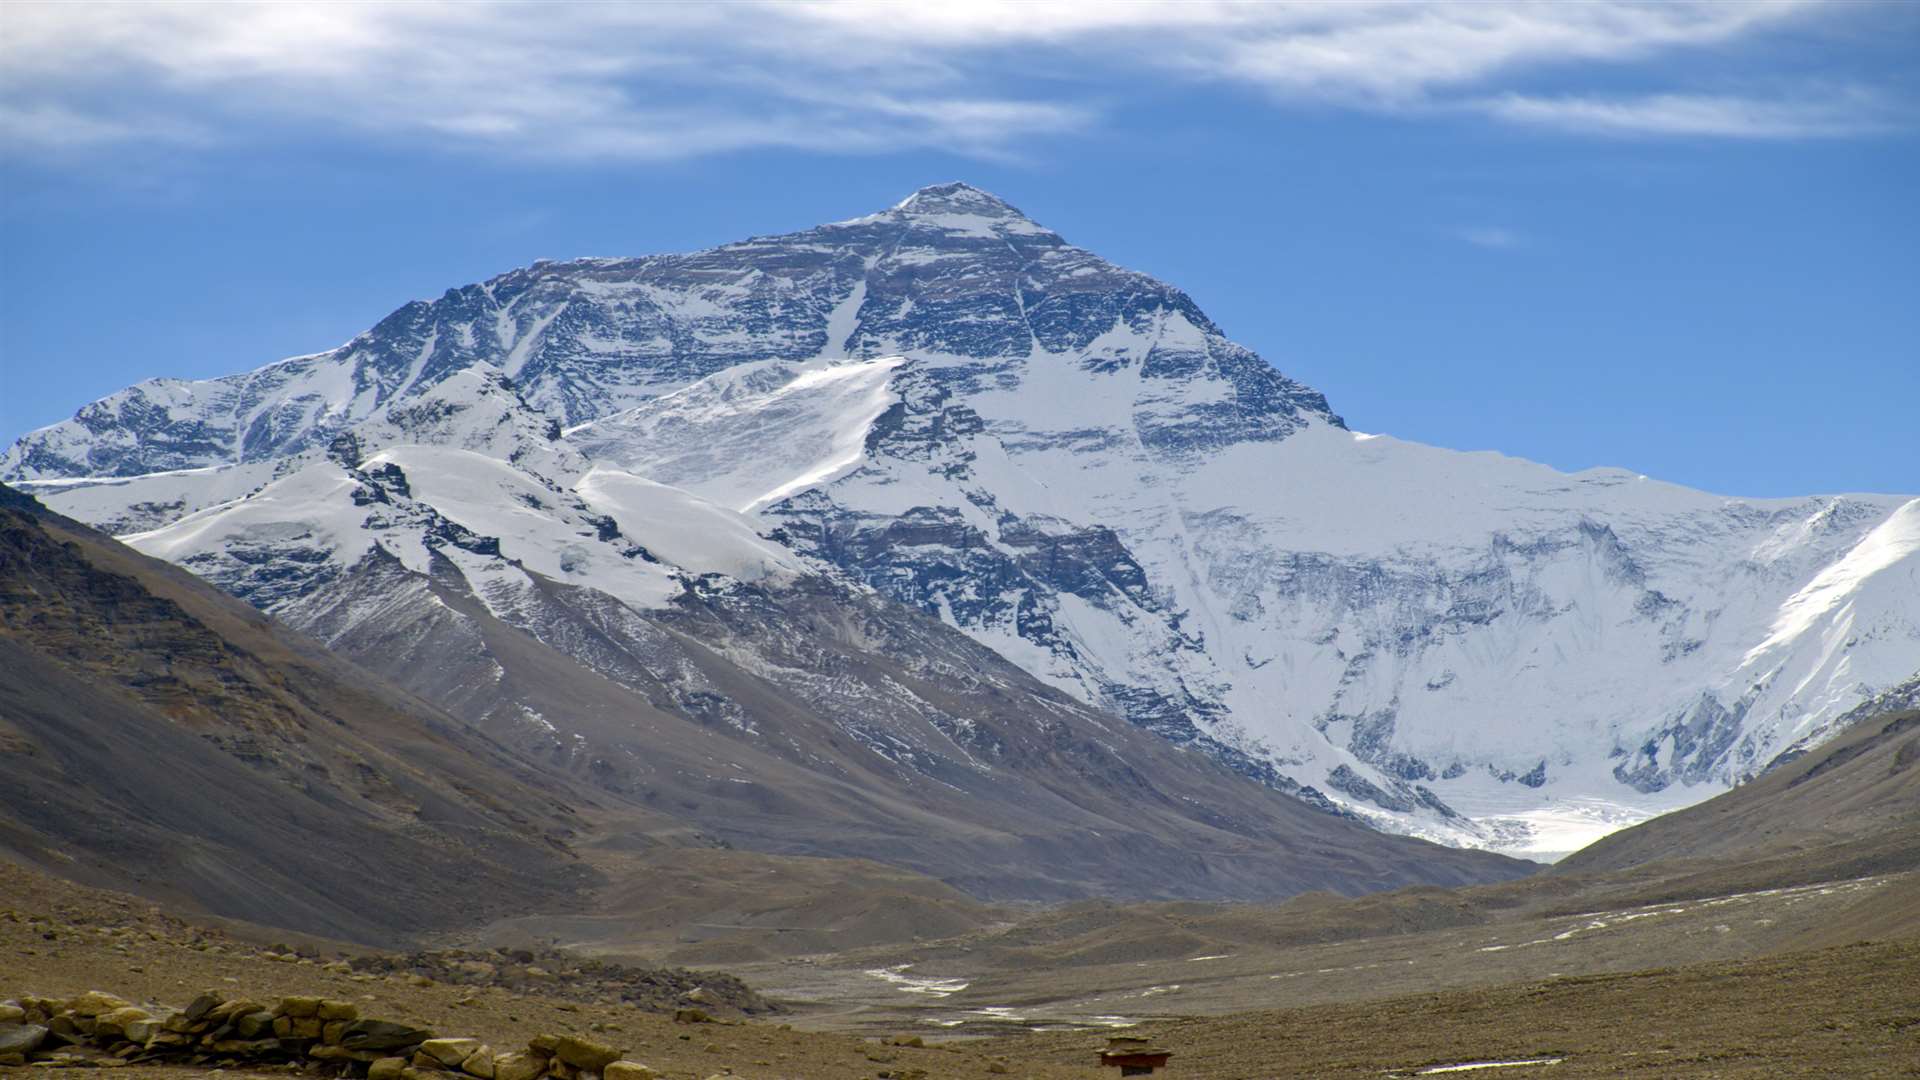 Mount Everest in Nepal Image: Thinkstock Image Library